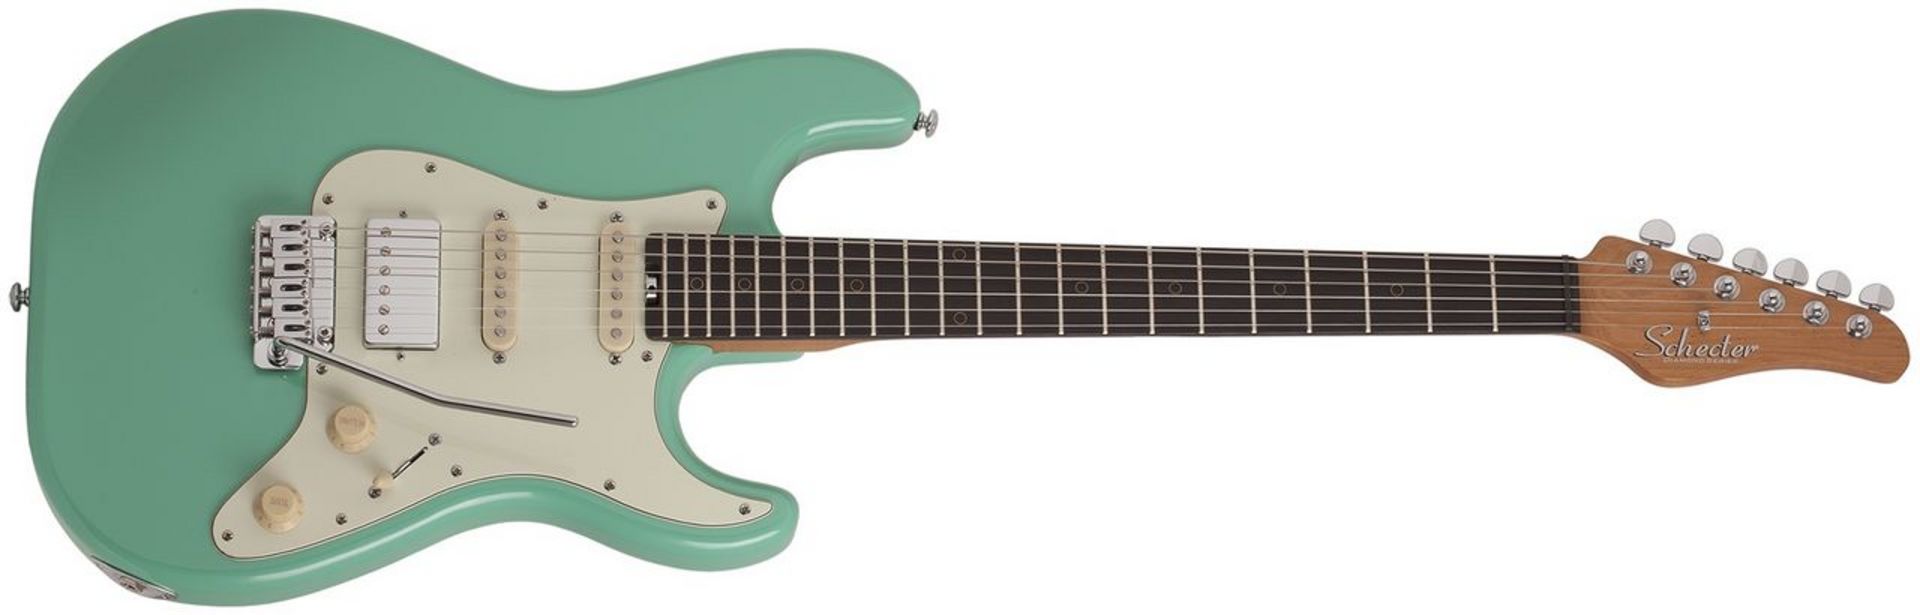 Schecter - Nick Johnston Traditional Atomic Green